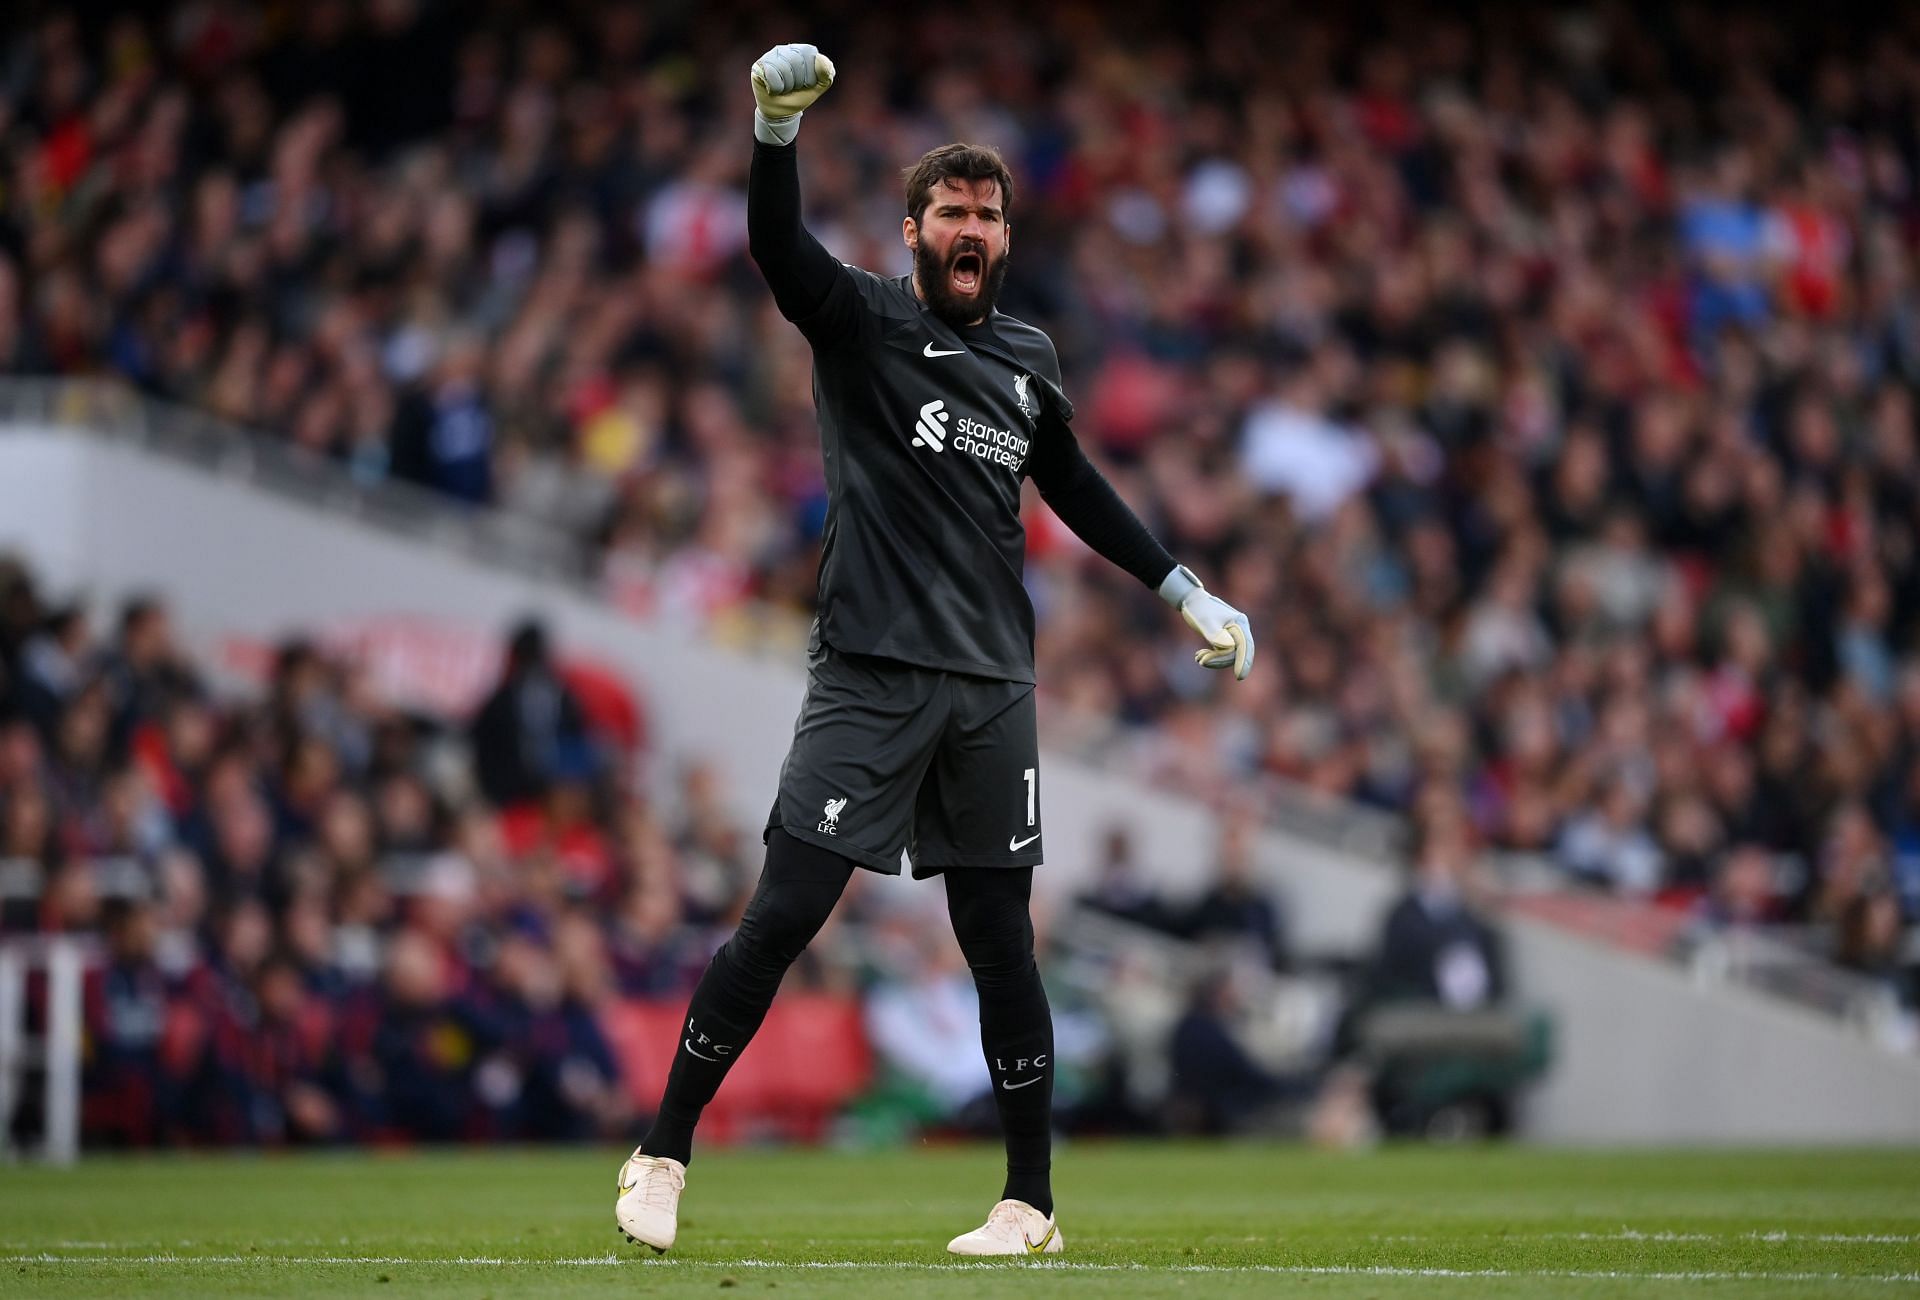 Alisson Becker is among the greatest goalkeepers to play for Liverpool